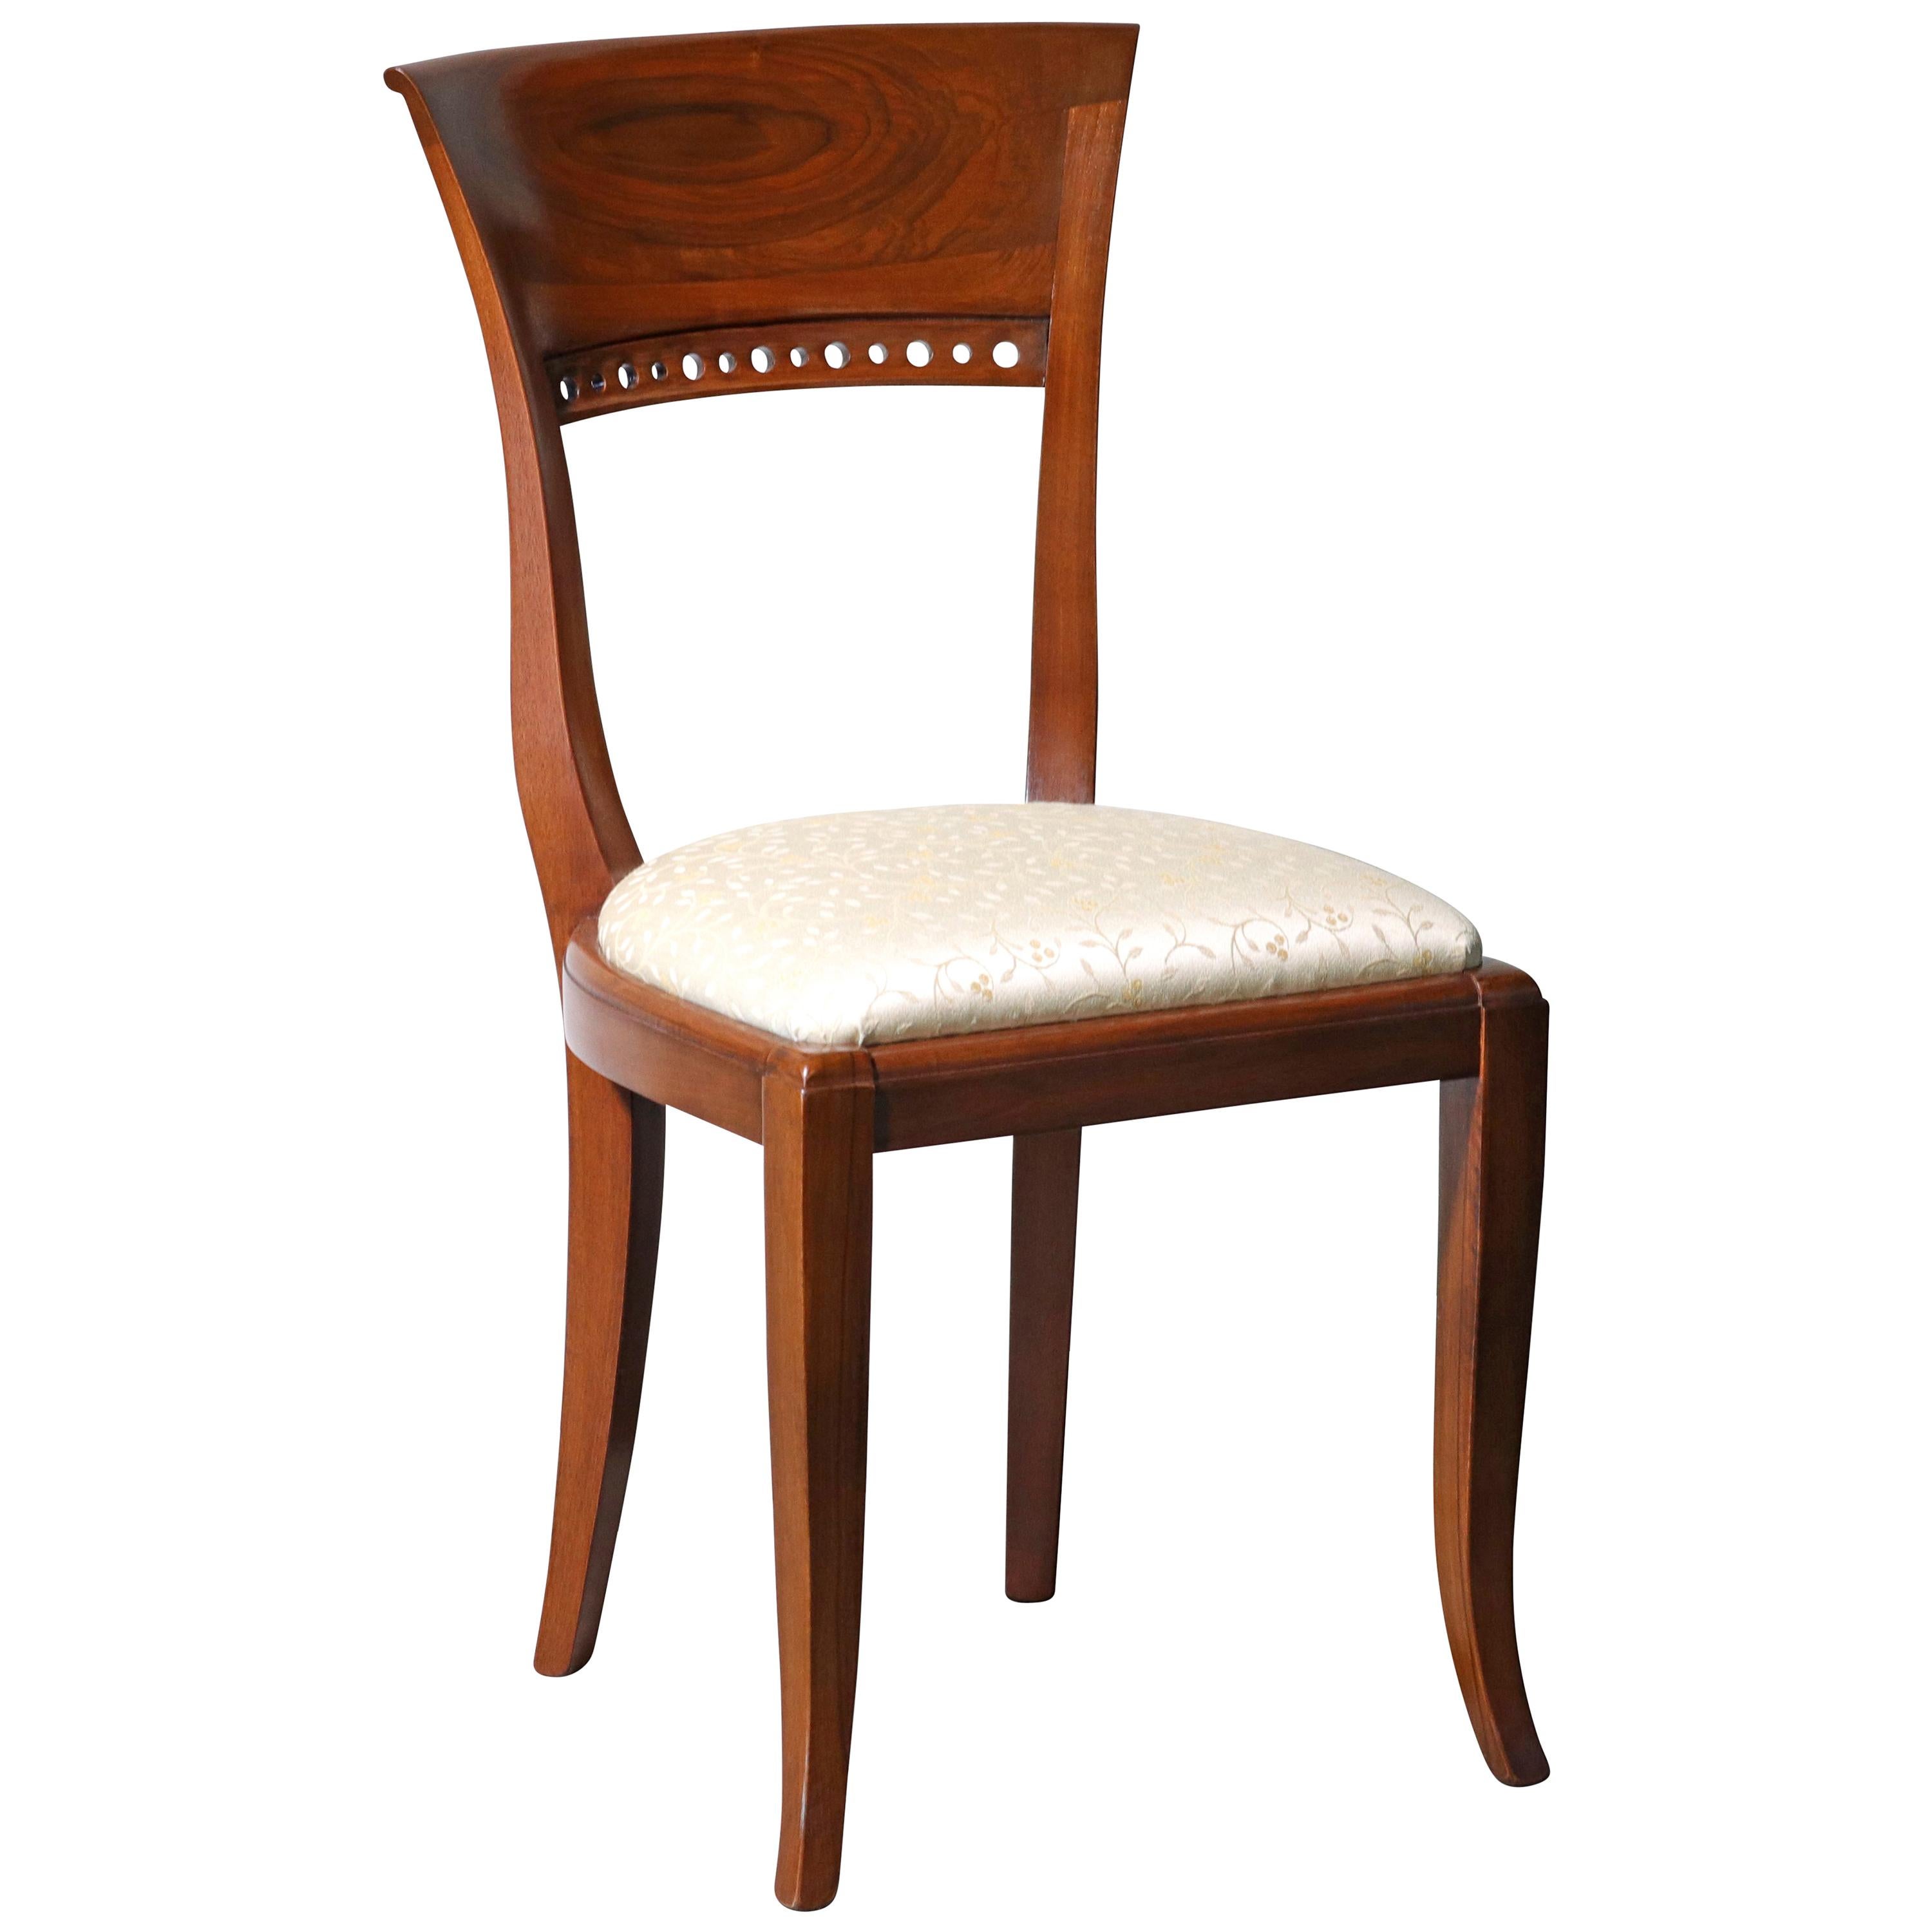 Italian Walnut Deco Occasional Chair with Modern Upholstery, circa 1920 For Sale